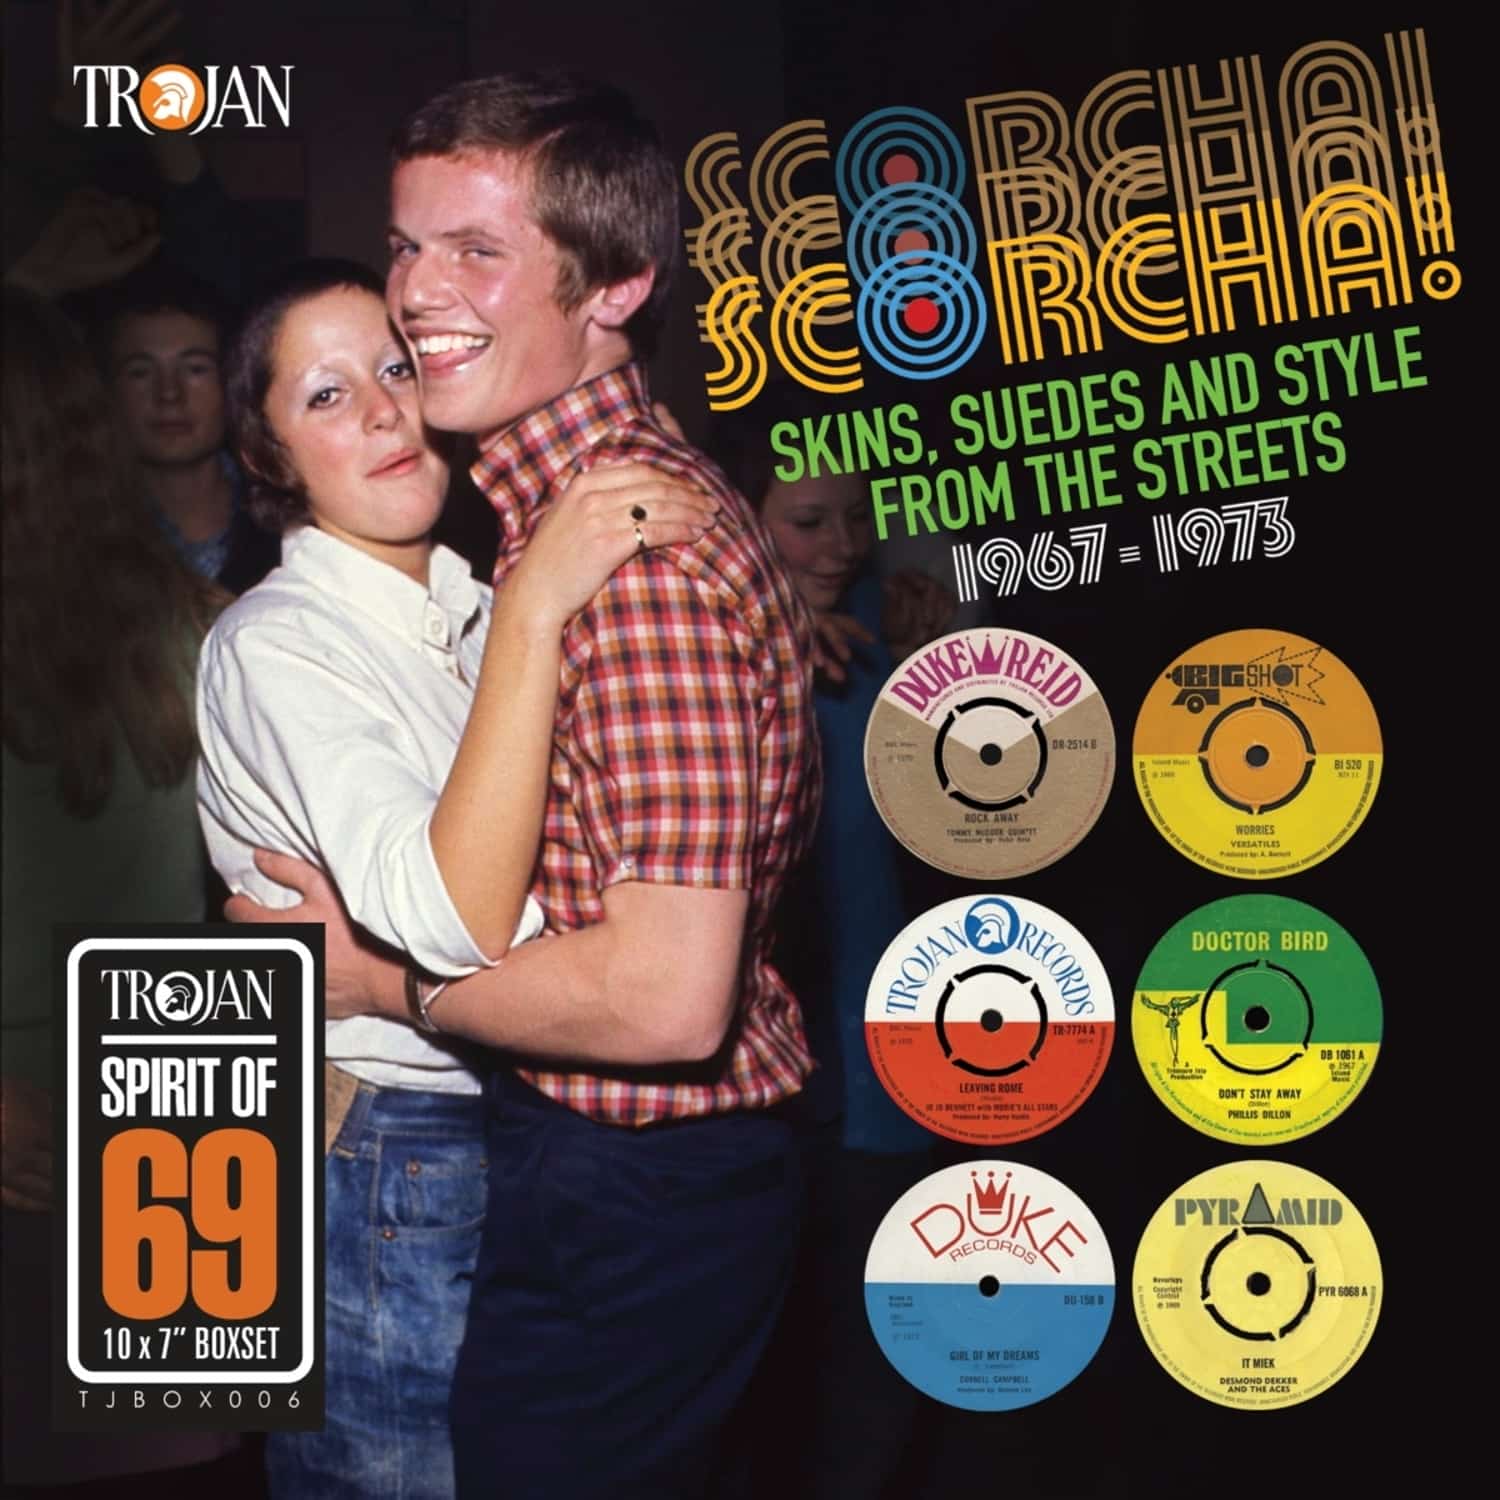 Scorcha! - SCORCHA!-SKINS, SUEDES AND STYLE FROM THE STREETS  